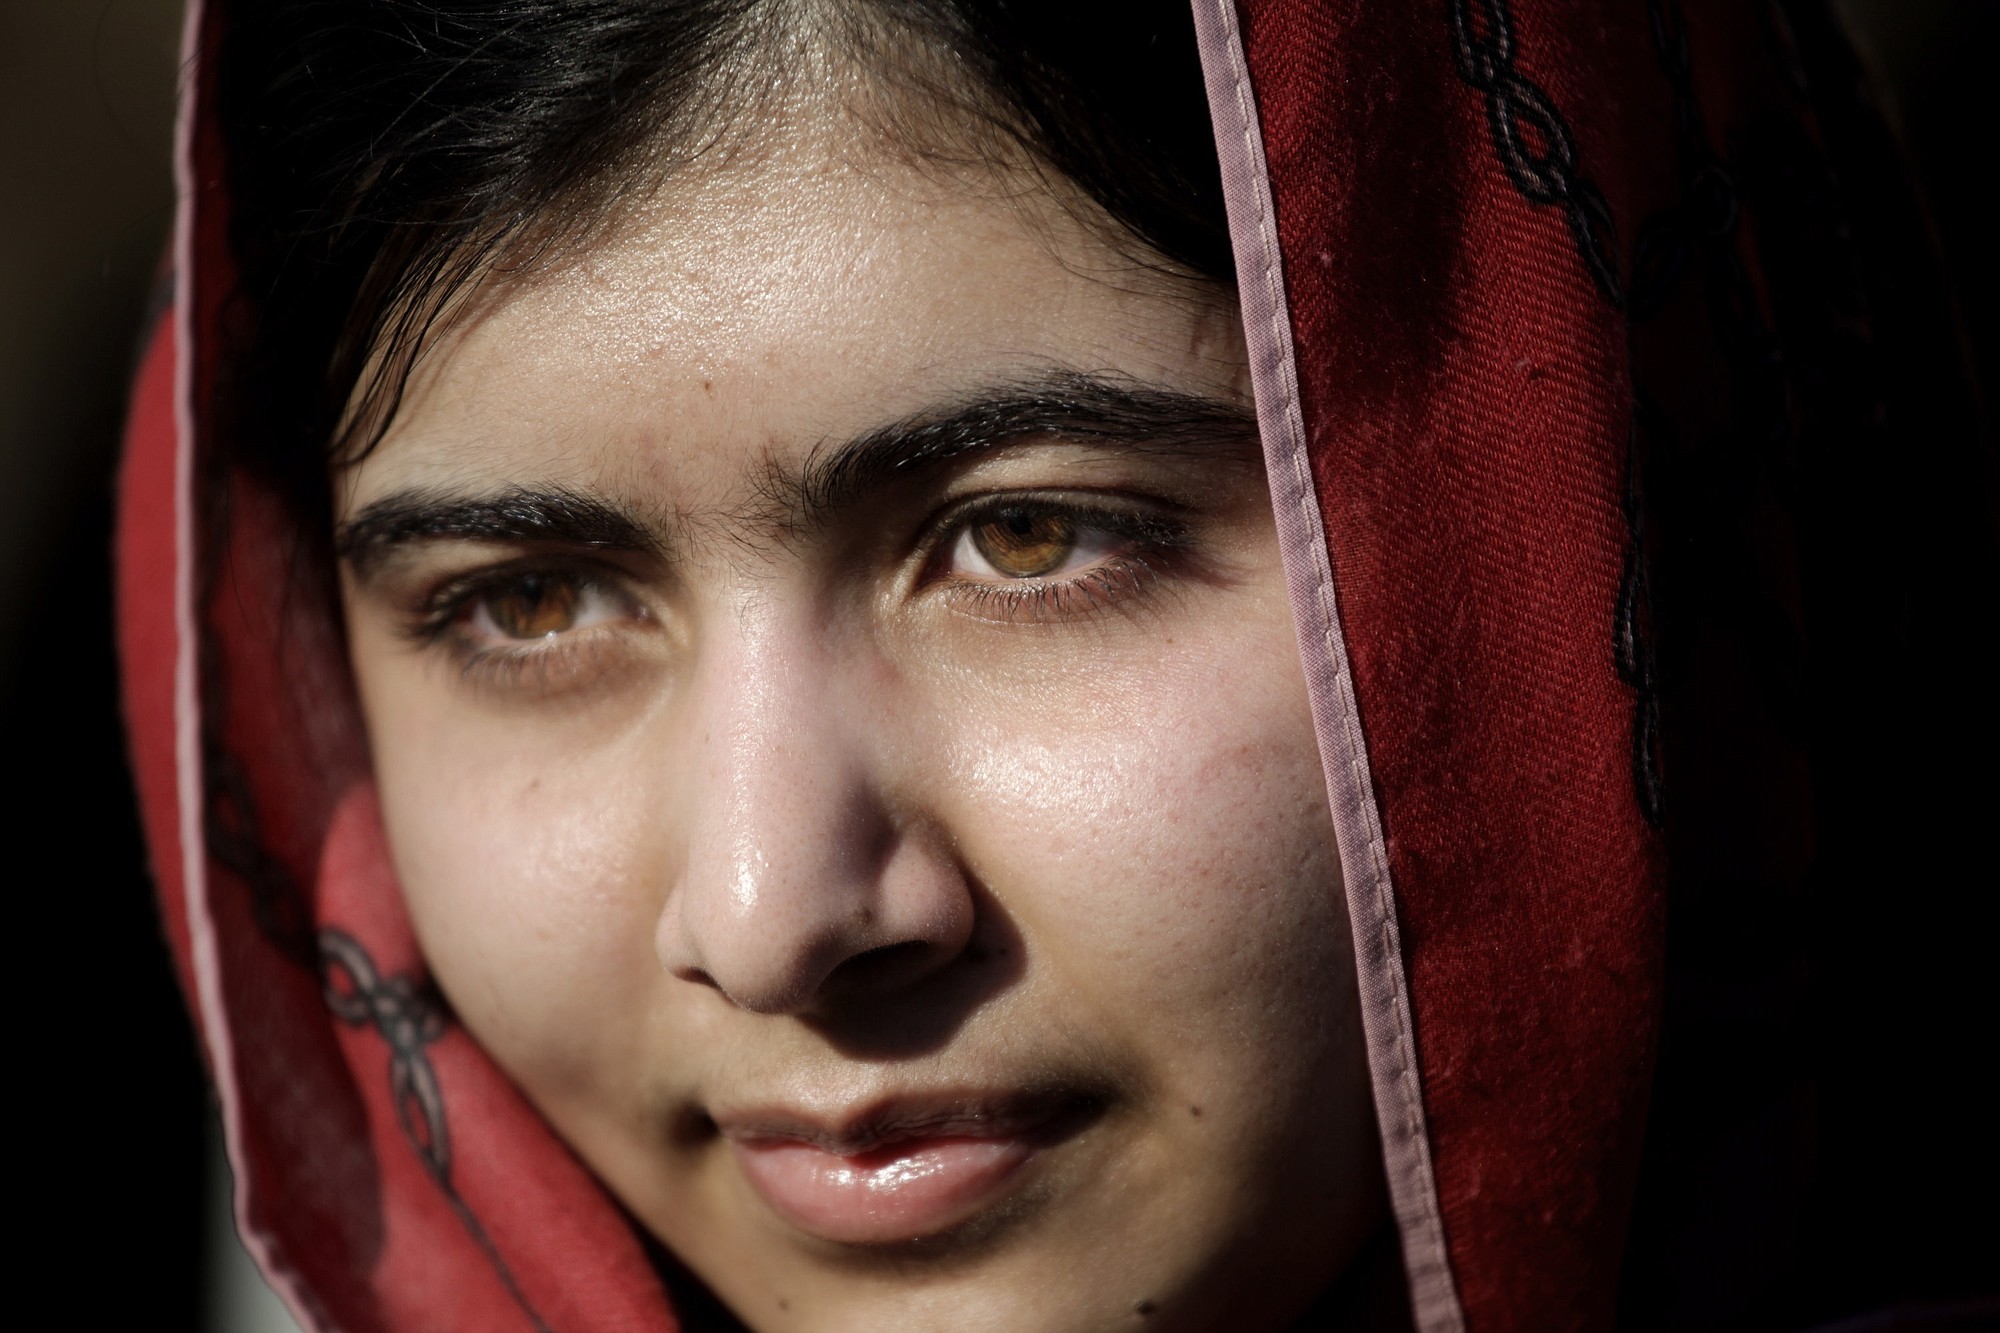 Associated Press files
Malala Yousafzai was shot in the head and neck in October 2012.